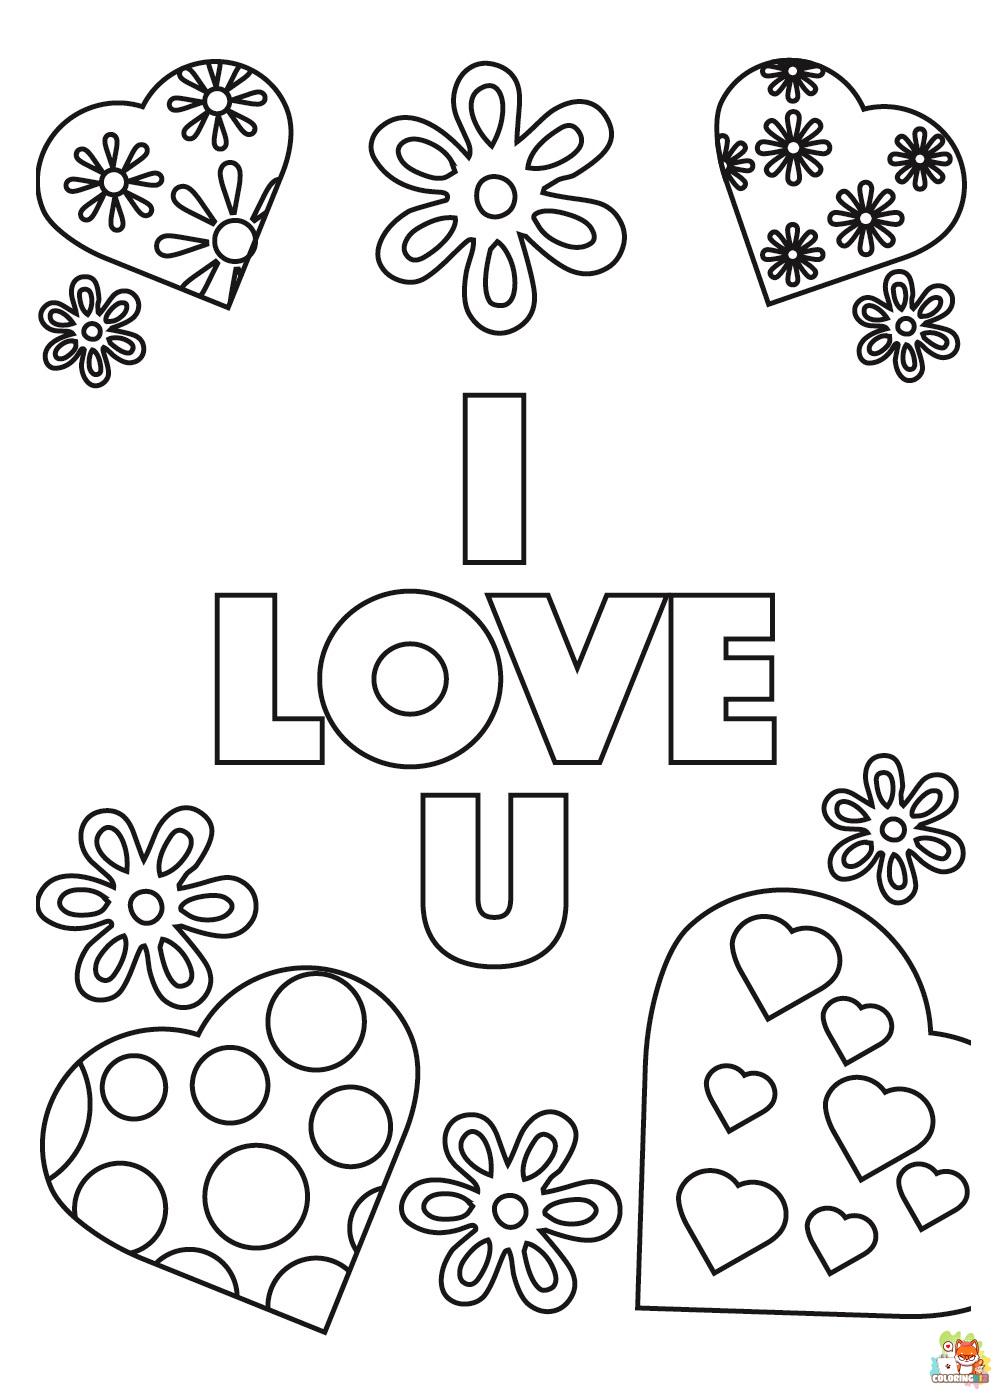 I Love You coloring pages printable 2